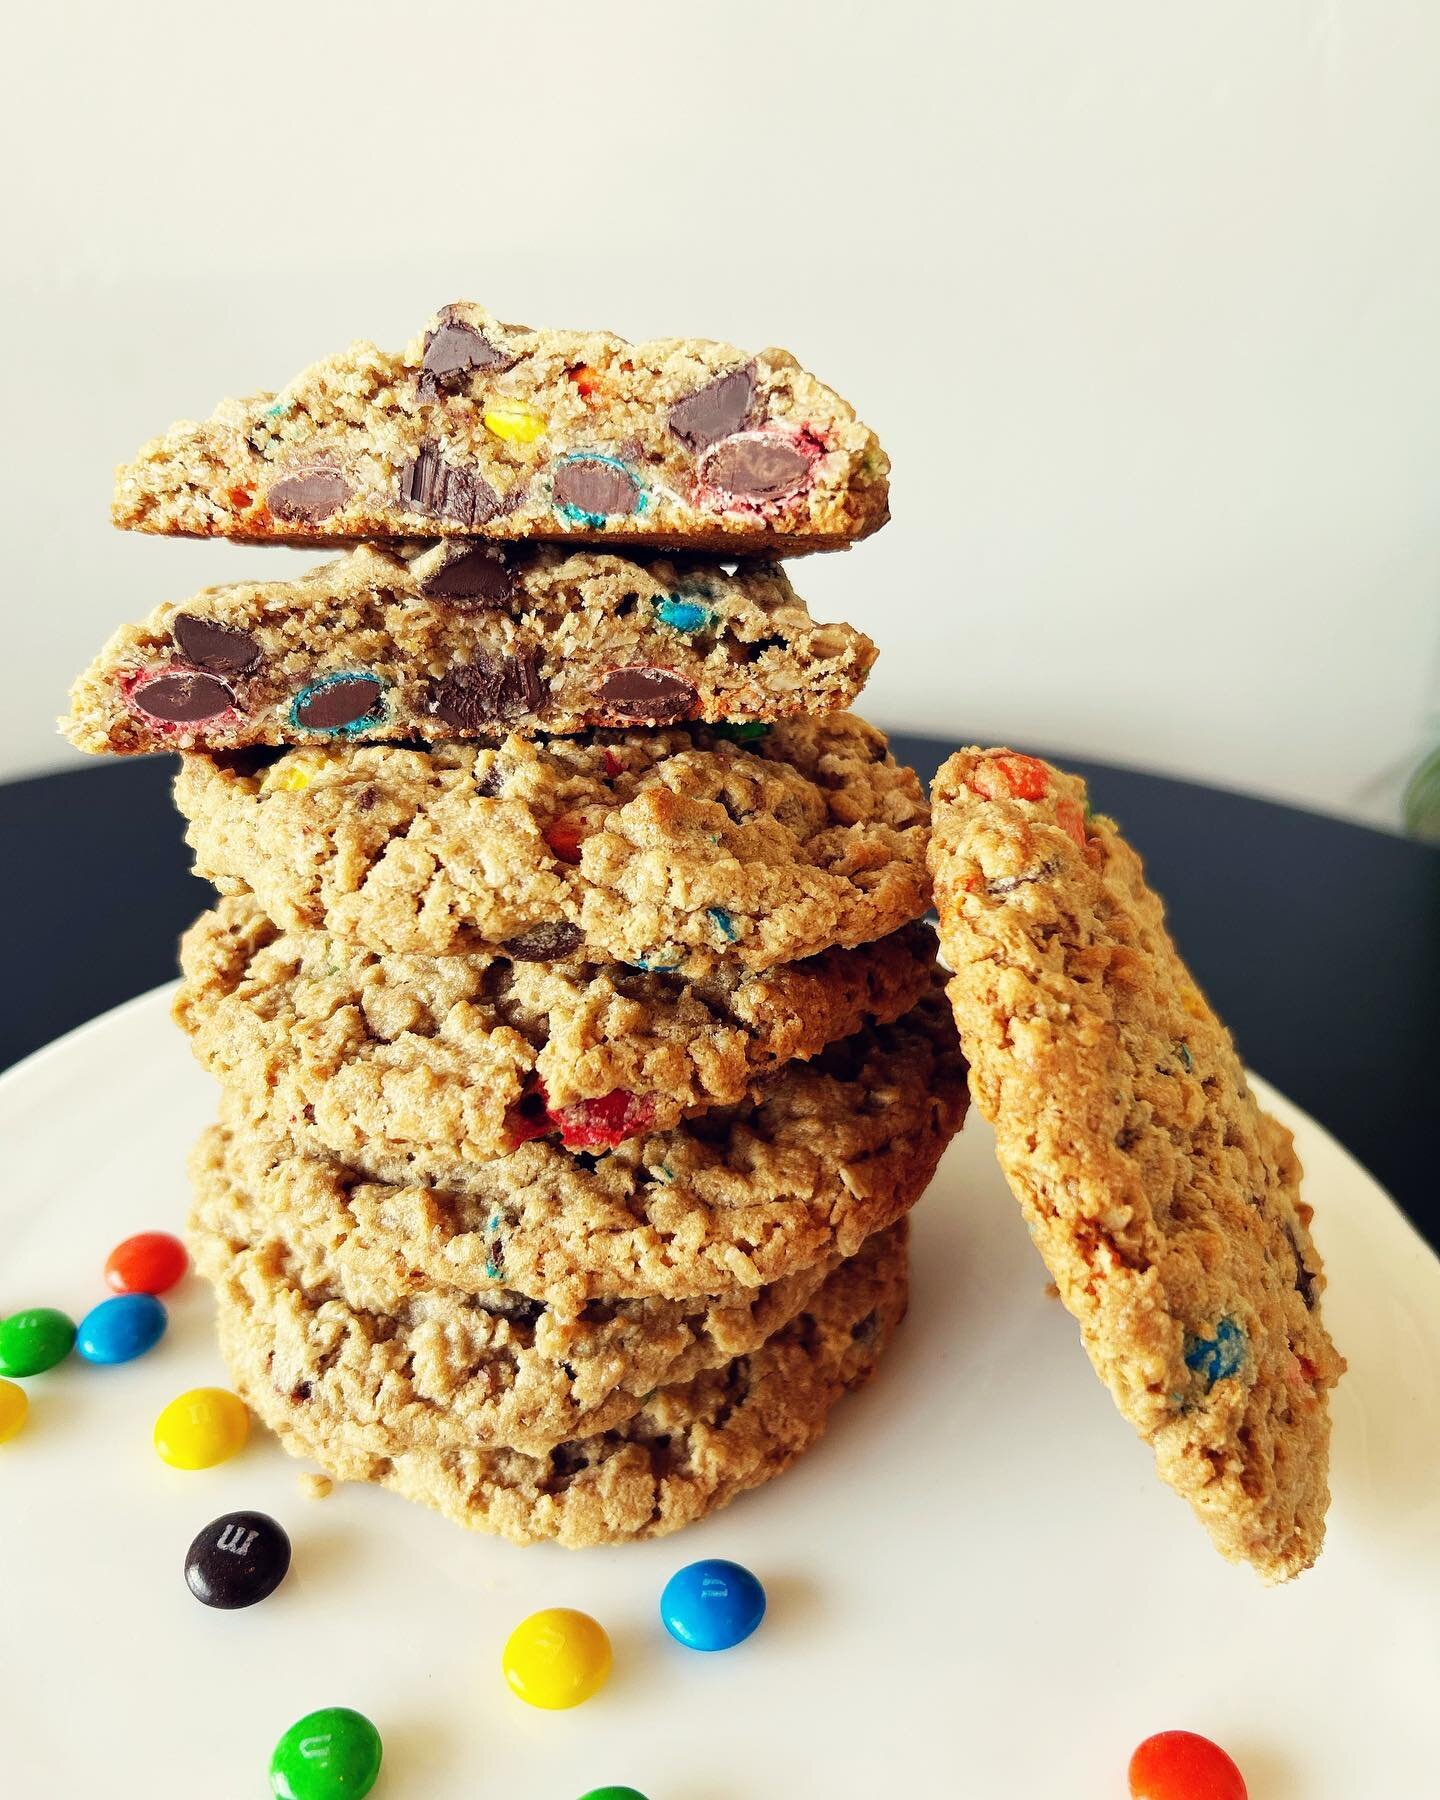 ☀️COOKIES COOKIES COOKIES☀️ 
 Come join us on this GORGEOUS day for one of our new sandwiches AND our featured cookie of the week: THE MONSTER COOKIE!!
*Peanut Butter
*M&amp;M&rsquo;s
*Oats
*Chocolate Chips
Who doesn&rsquo;t love a HOMEMADE treat?!
O